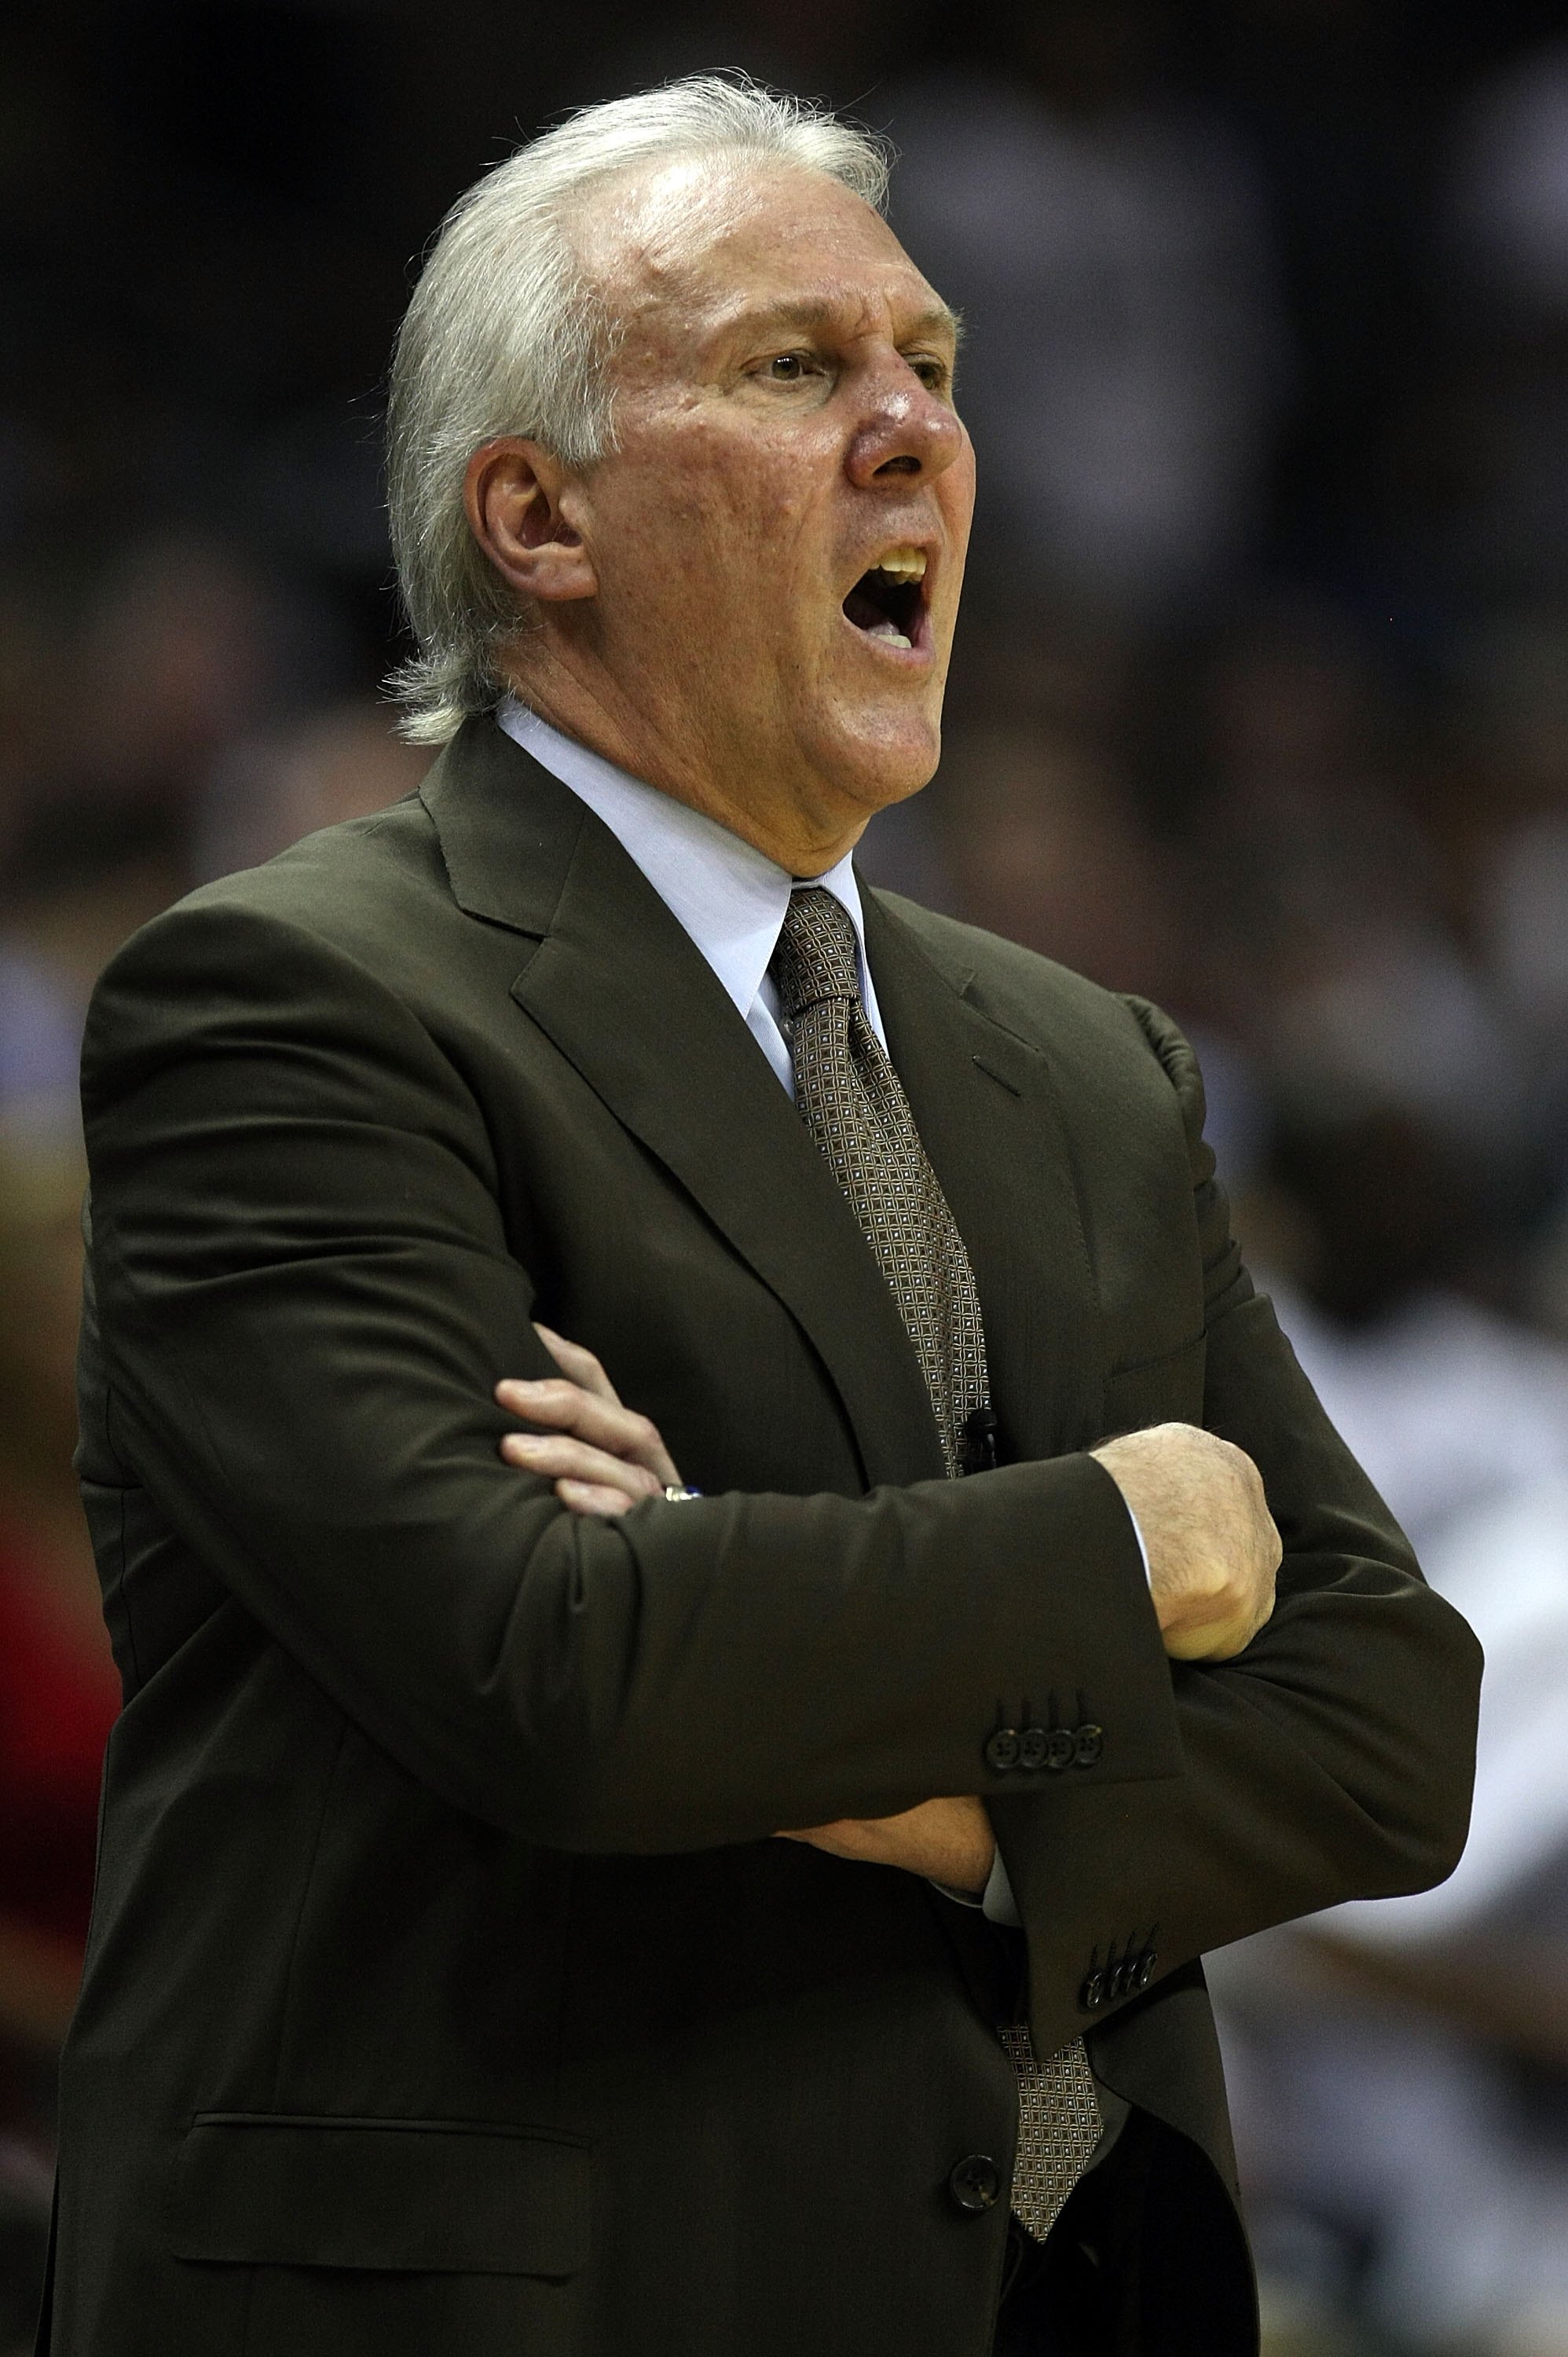 SAN ANTONIO - MAY 27:  Head coach Gregg Popovich of the San Antonio Spurs calls out while taking on the Los Angeles Lakers in Game Four of the Western Conference Finals during the 2008 NBA Playoffs on May 27, 2008 at the AT&T Center in San Antonio, Texas.